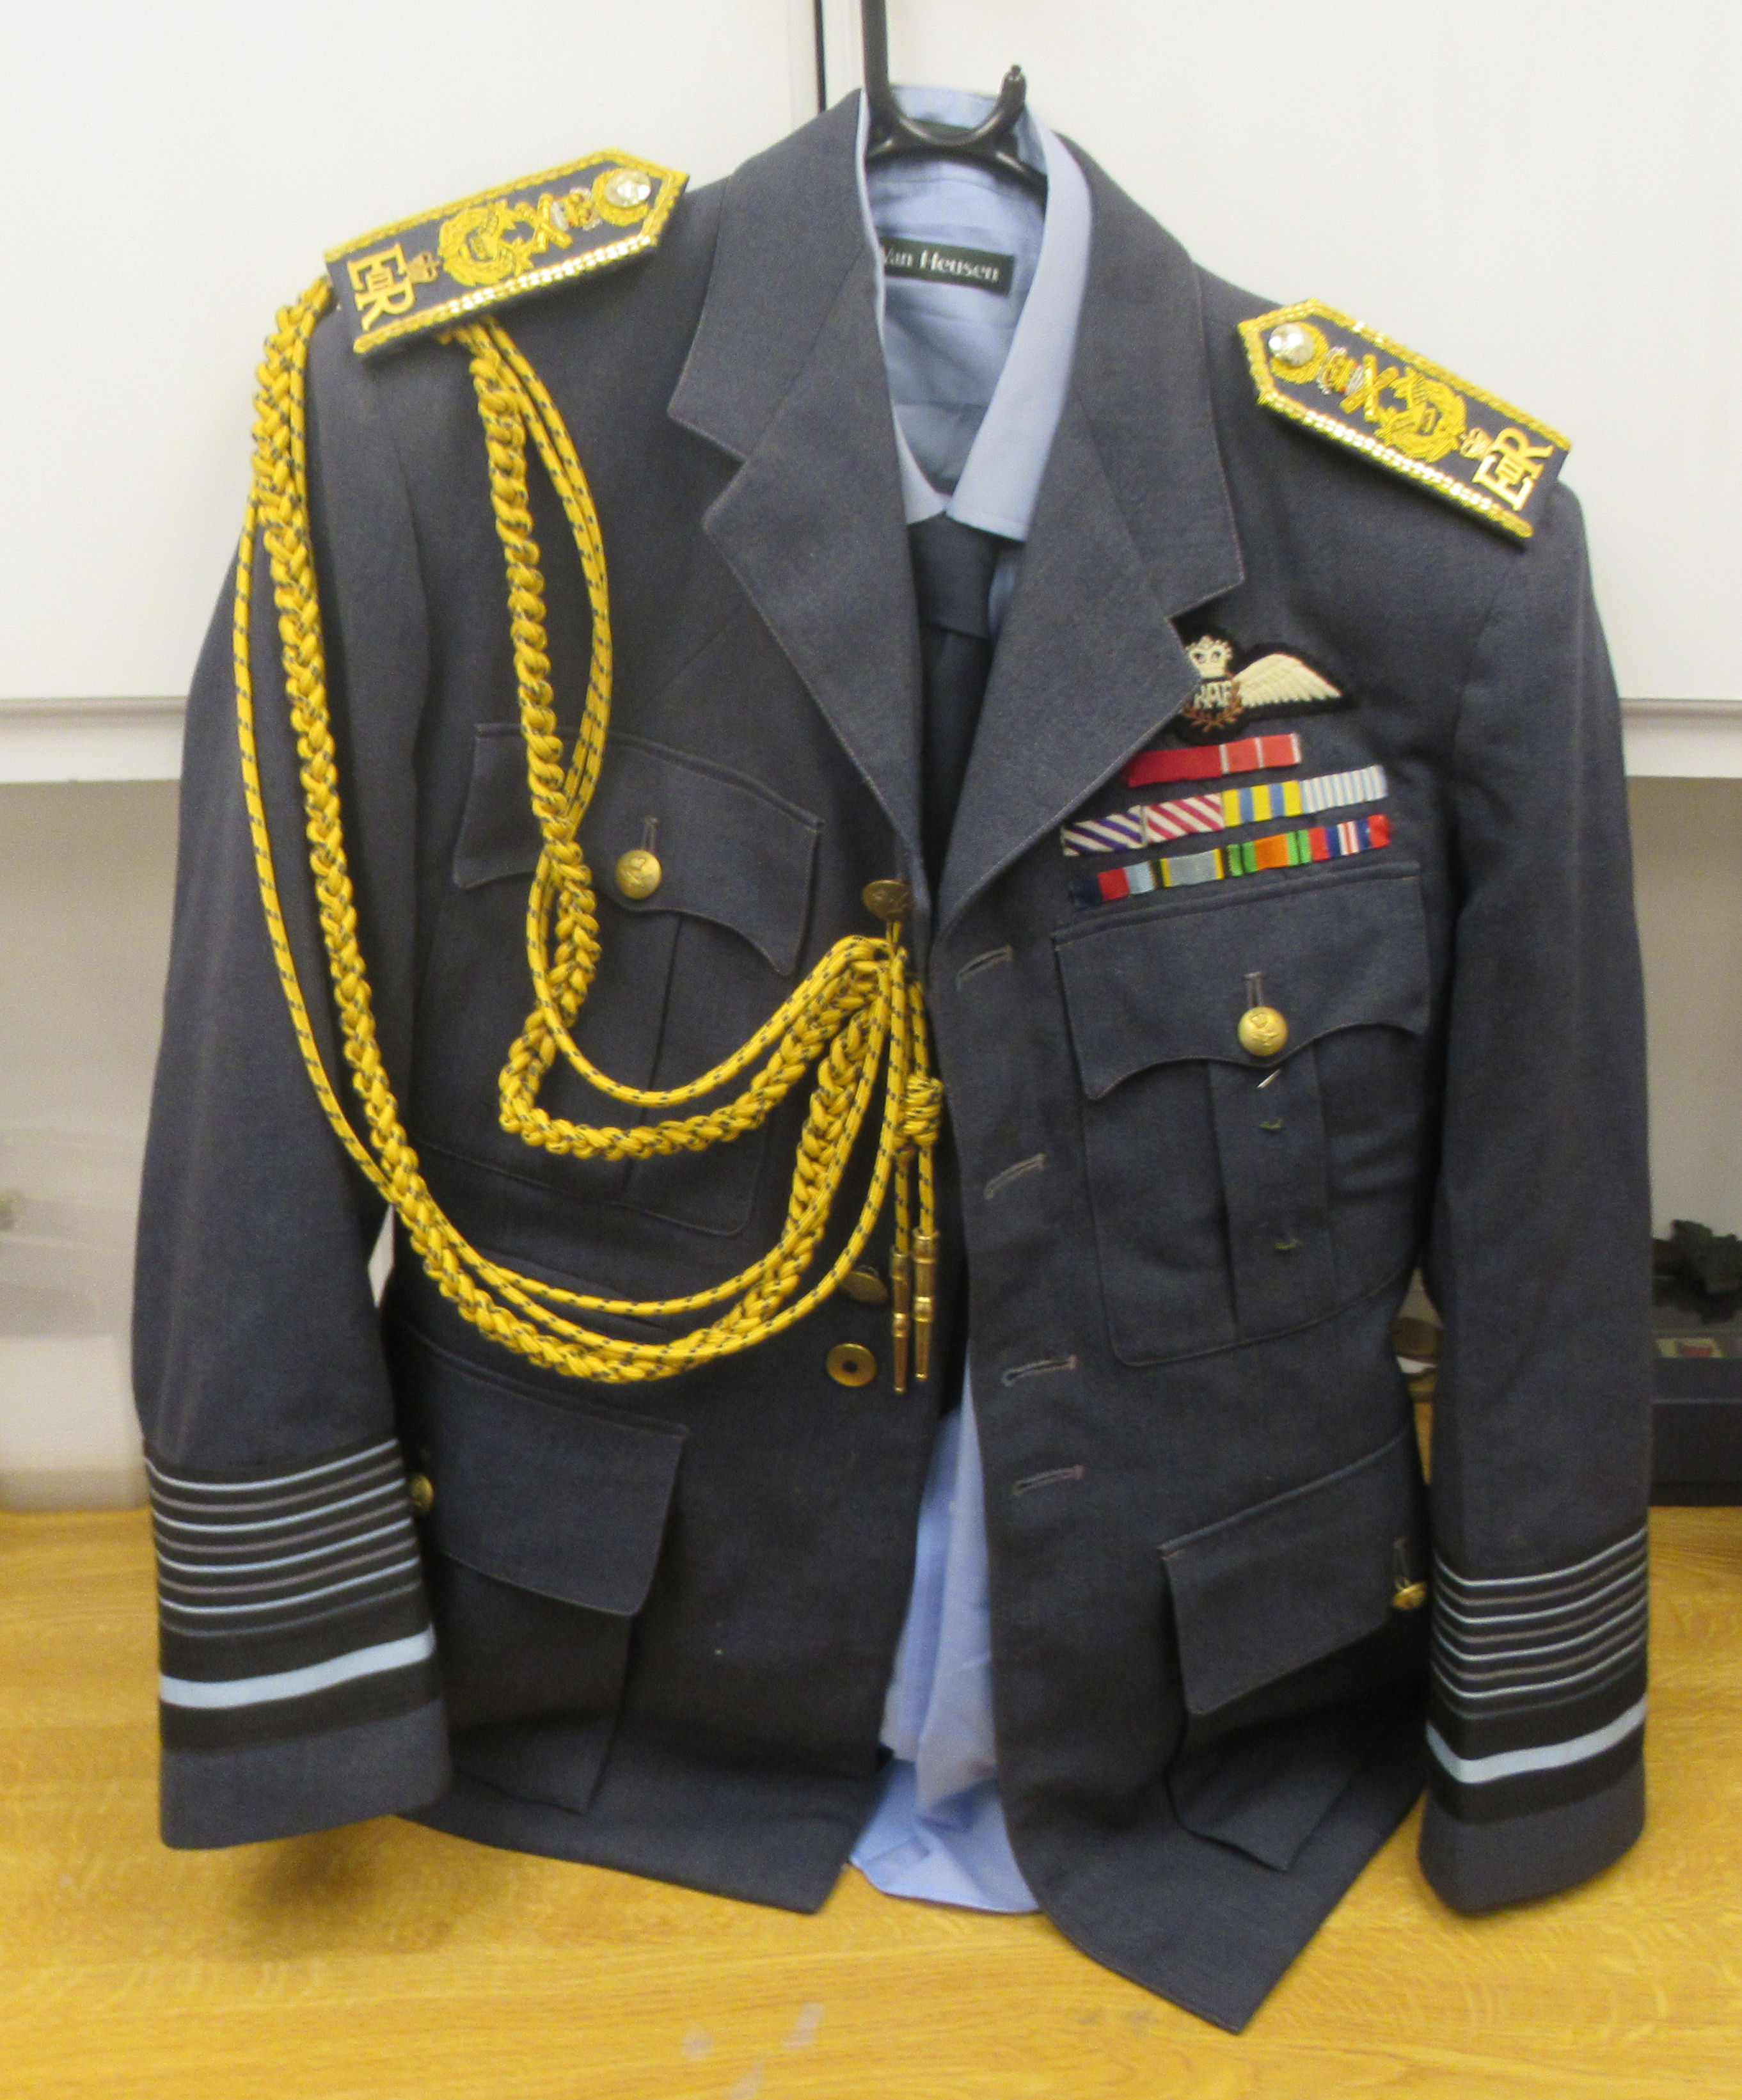 An RAF Senior Officer's uniform, comprising a tunic with medal ribbons and braided epaulettes, a - Image 2 of 12